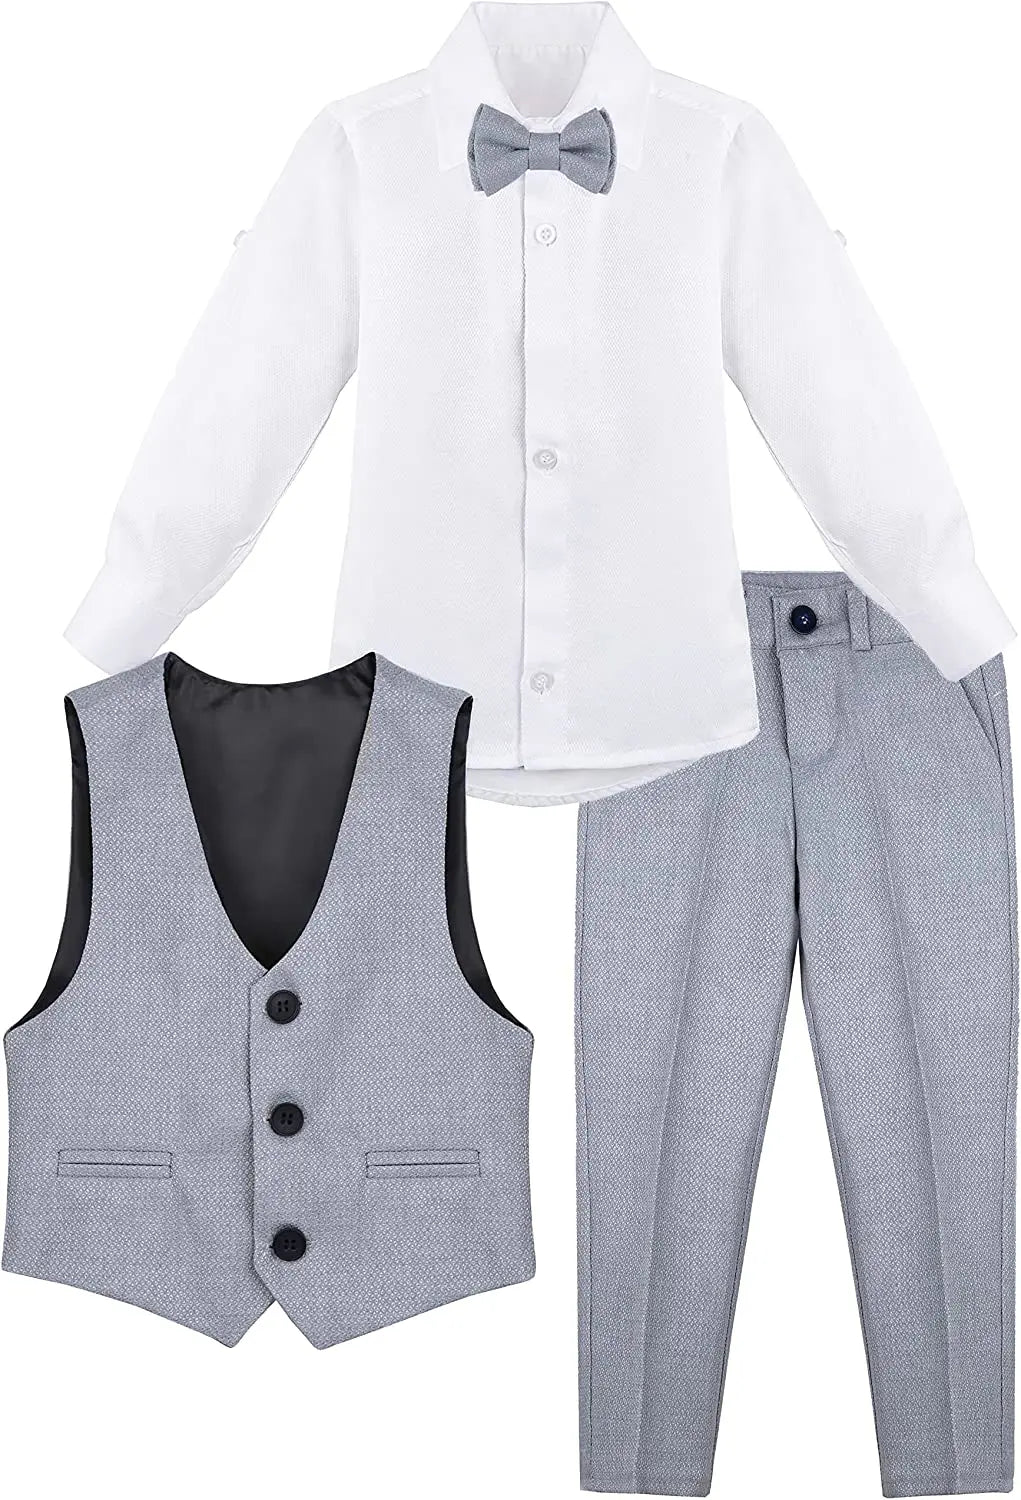 Amazon.com: 524 Polka-SLM-NVY HNK Cocktail Italian Design All in One Boys  Suits 6 Piece Formal Wedding Complete Set in Navy Blue Size X-Large:  Clothing, Shoes & Jewelry